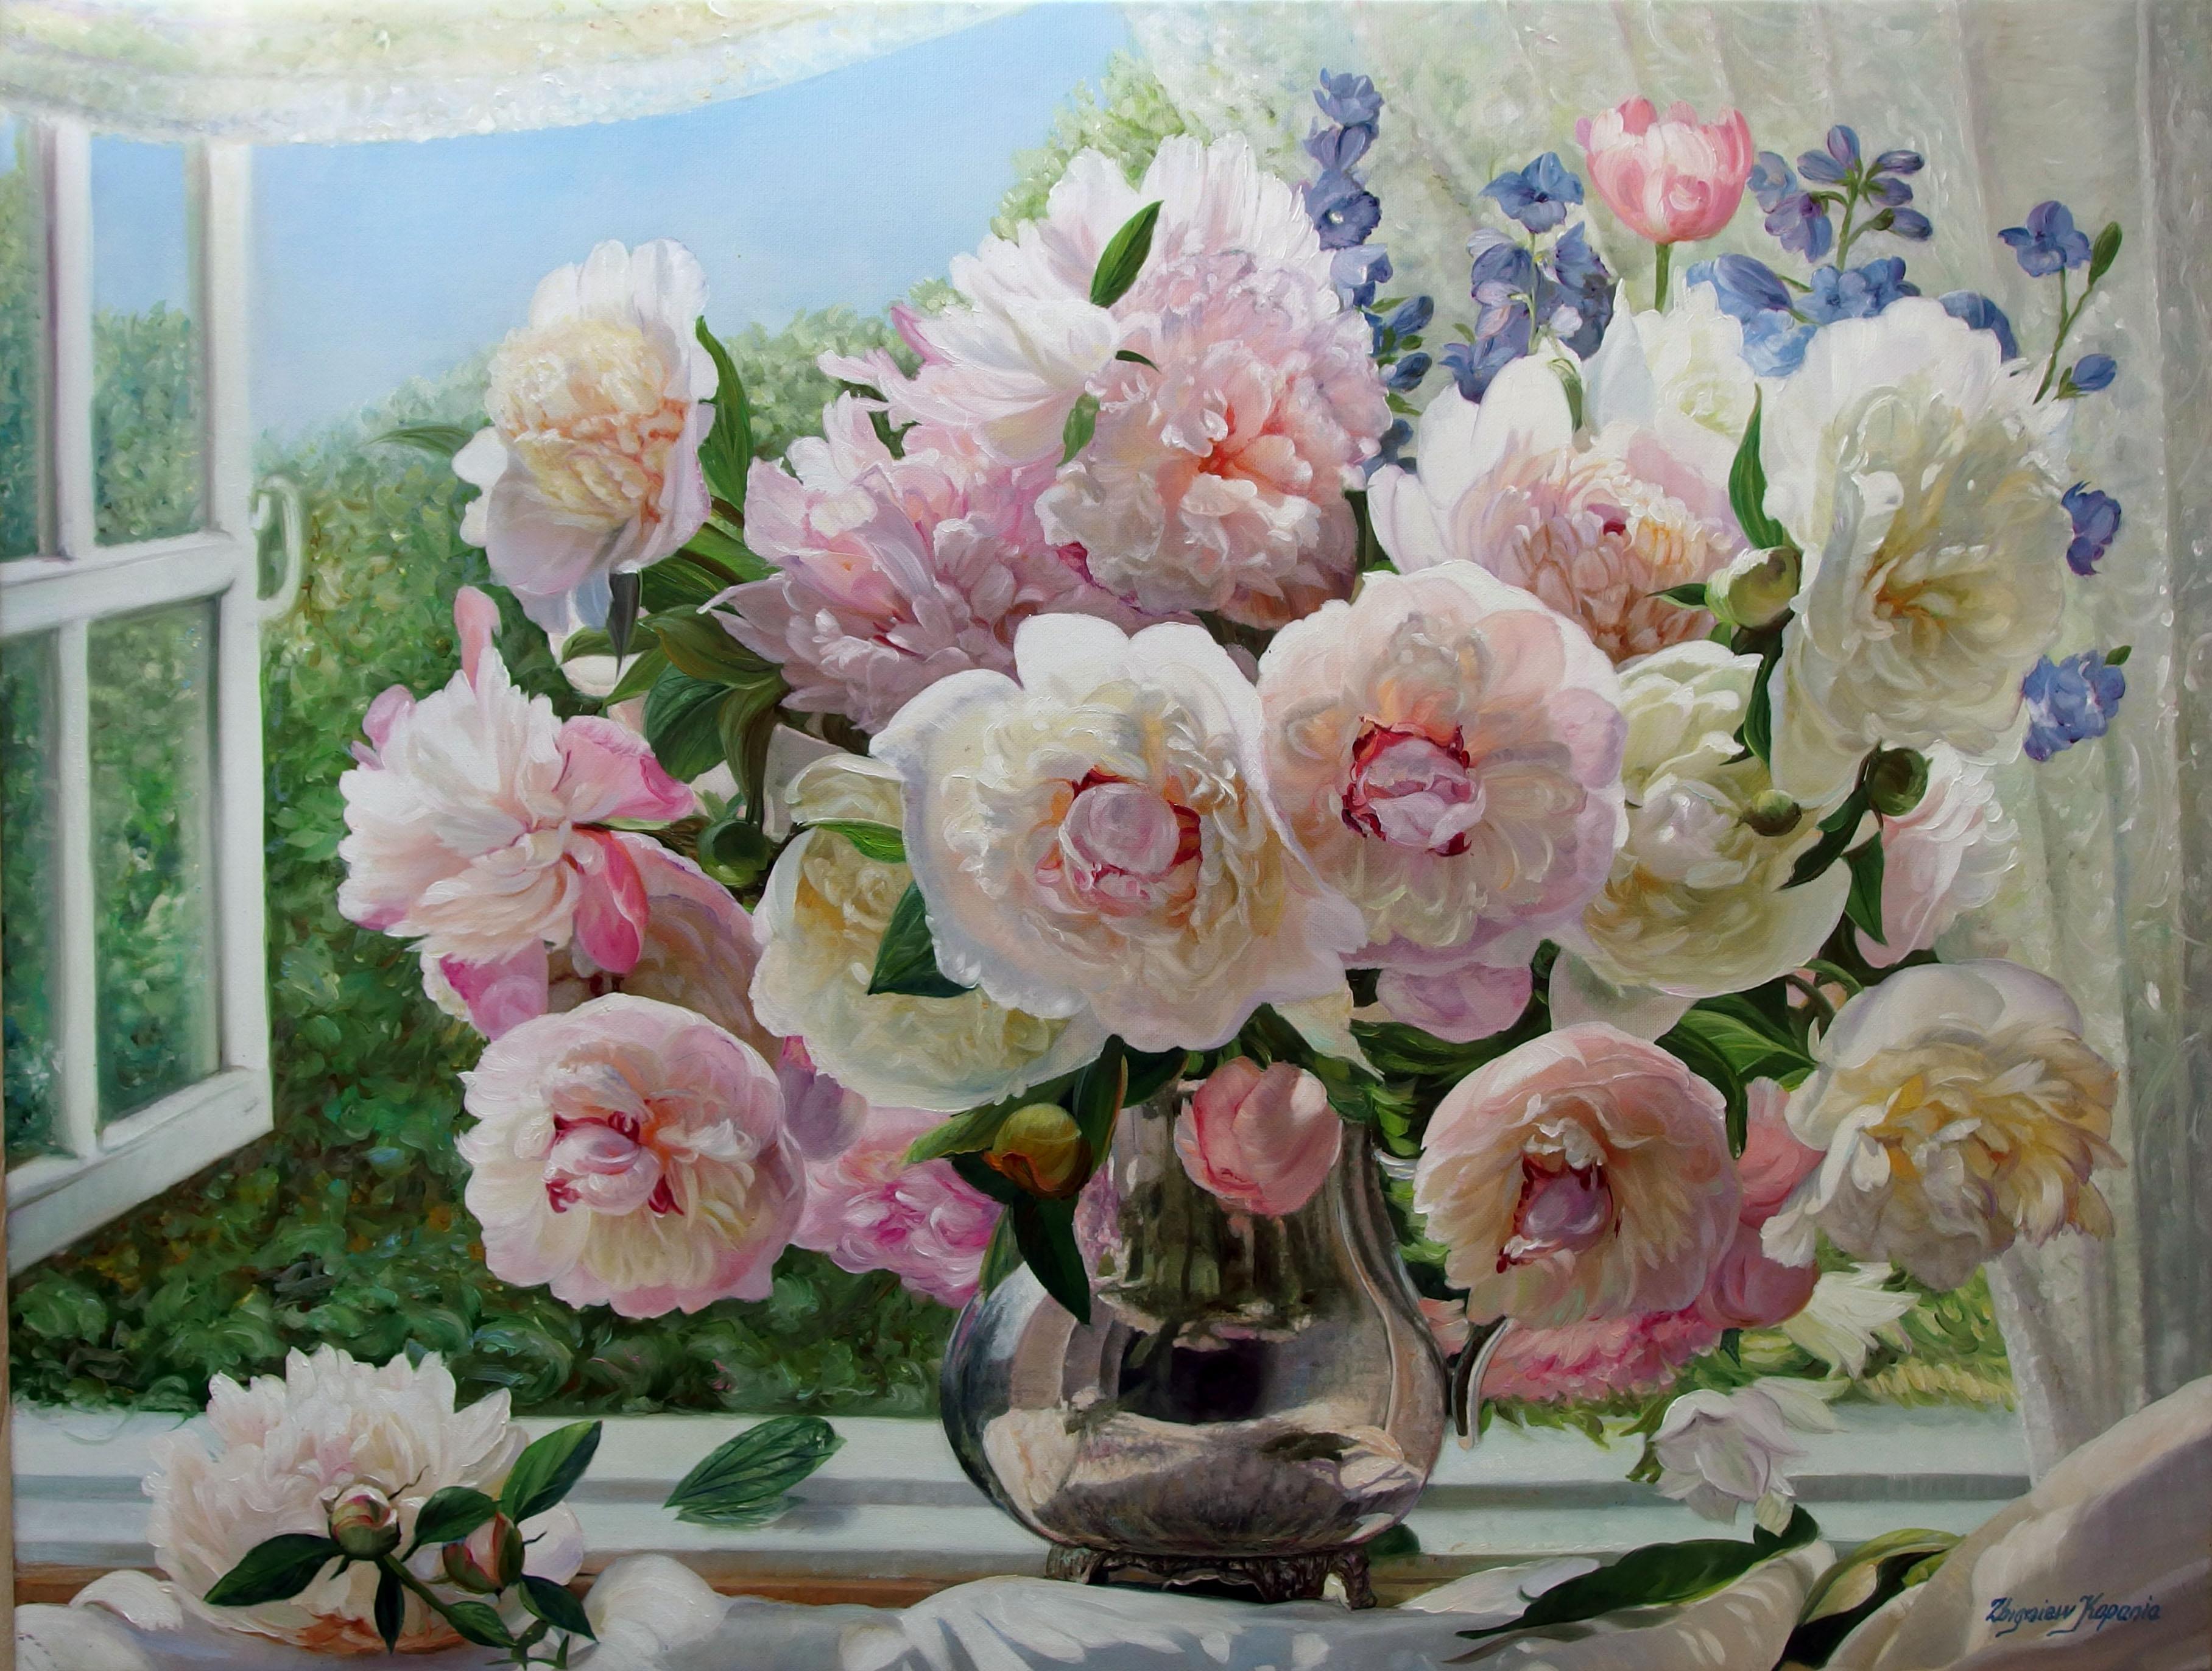 Zbigniew Kopania Figurative Painting - White And Pink Peonies in The Window